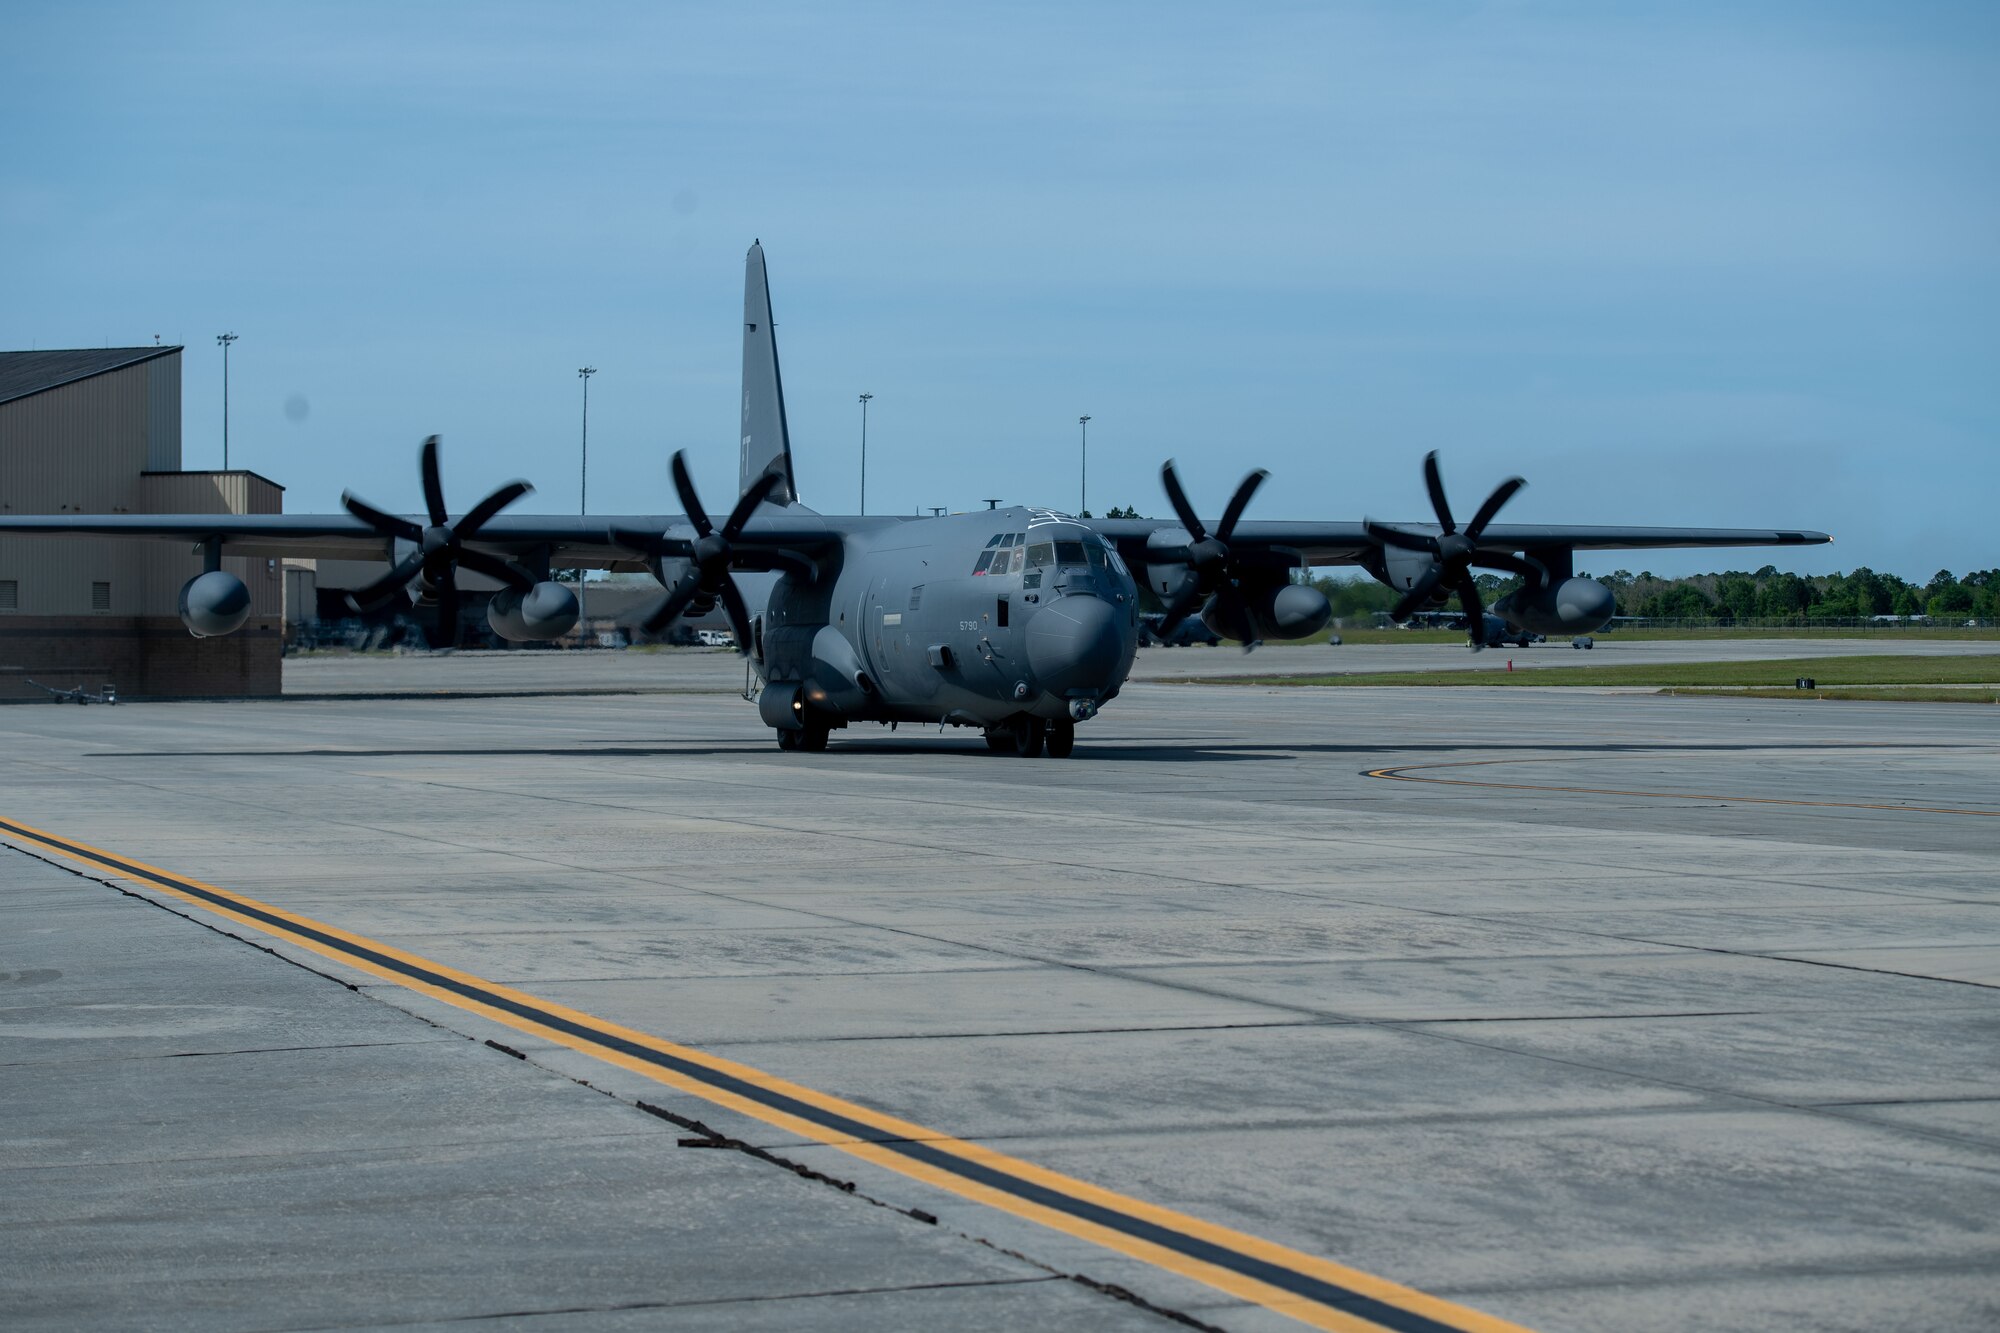 A U.S. Air Force pilot assigned to the 71st Rescue Squadron lands an HC-130J Combat King II in preparation for Exercise Ready Tiger 24-1 at Moody Air Force Base, Georgia, April 8, 2024. The aircraft were used to transport exercise participants to various locations for the Ready Tiger.  (U.S. Air Force photo by Airman Cade Ellis)